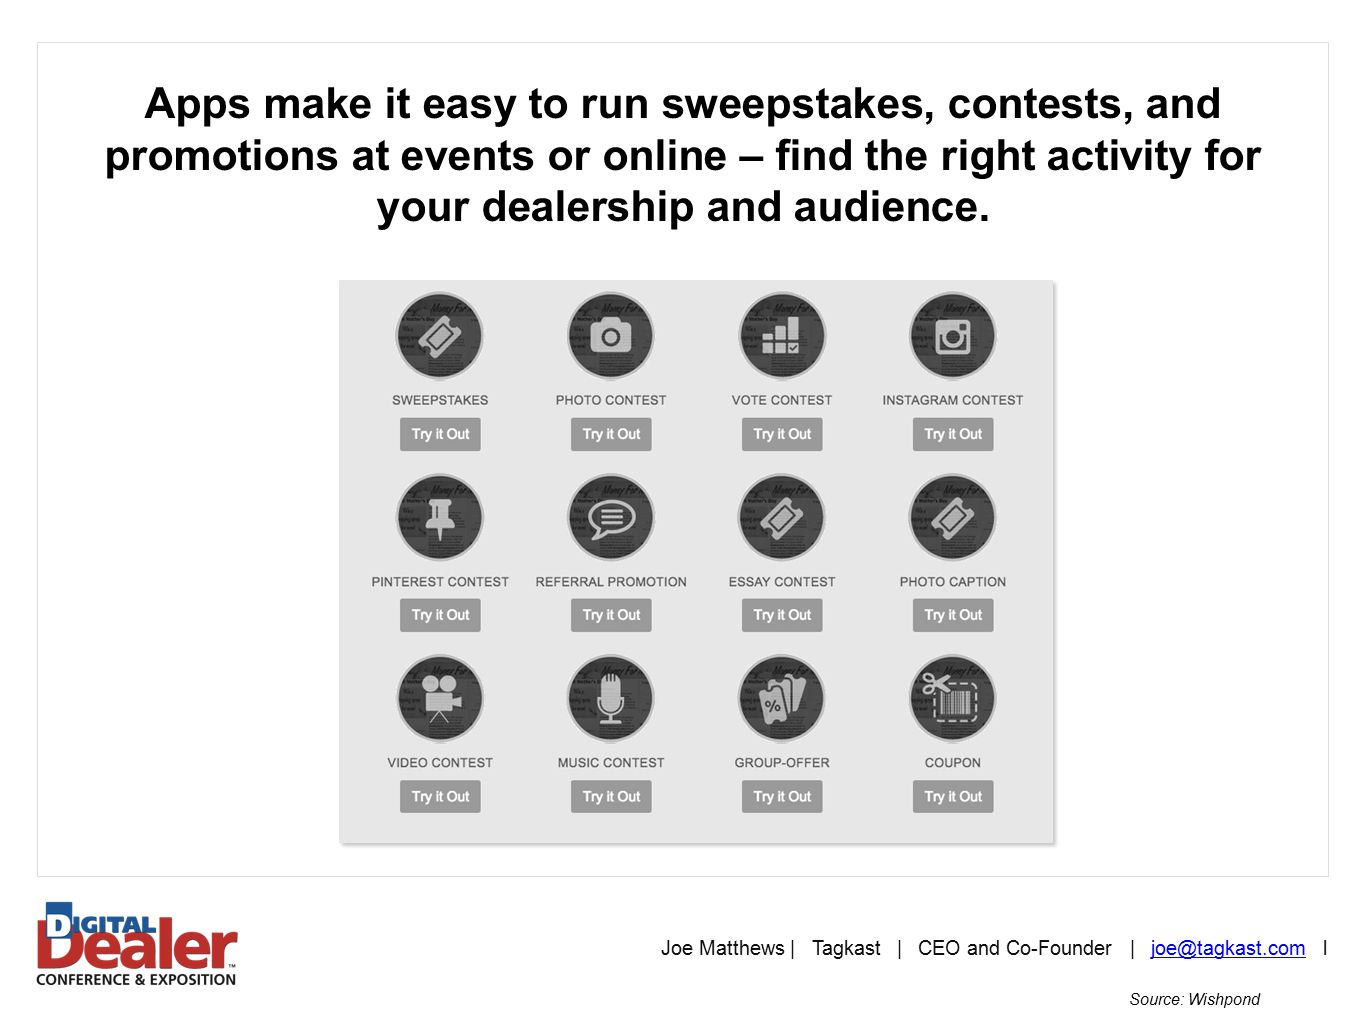 Joe Matthews | Tagkast | CEO and Co-Founder |  Apps make it easy to run sweepstakes, contests, and promotions at events or online – find the right activity for your dealership and audience.